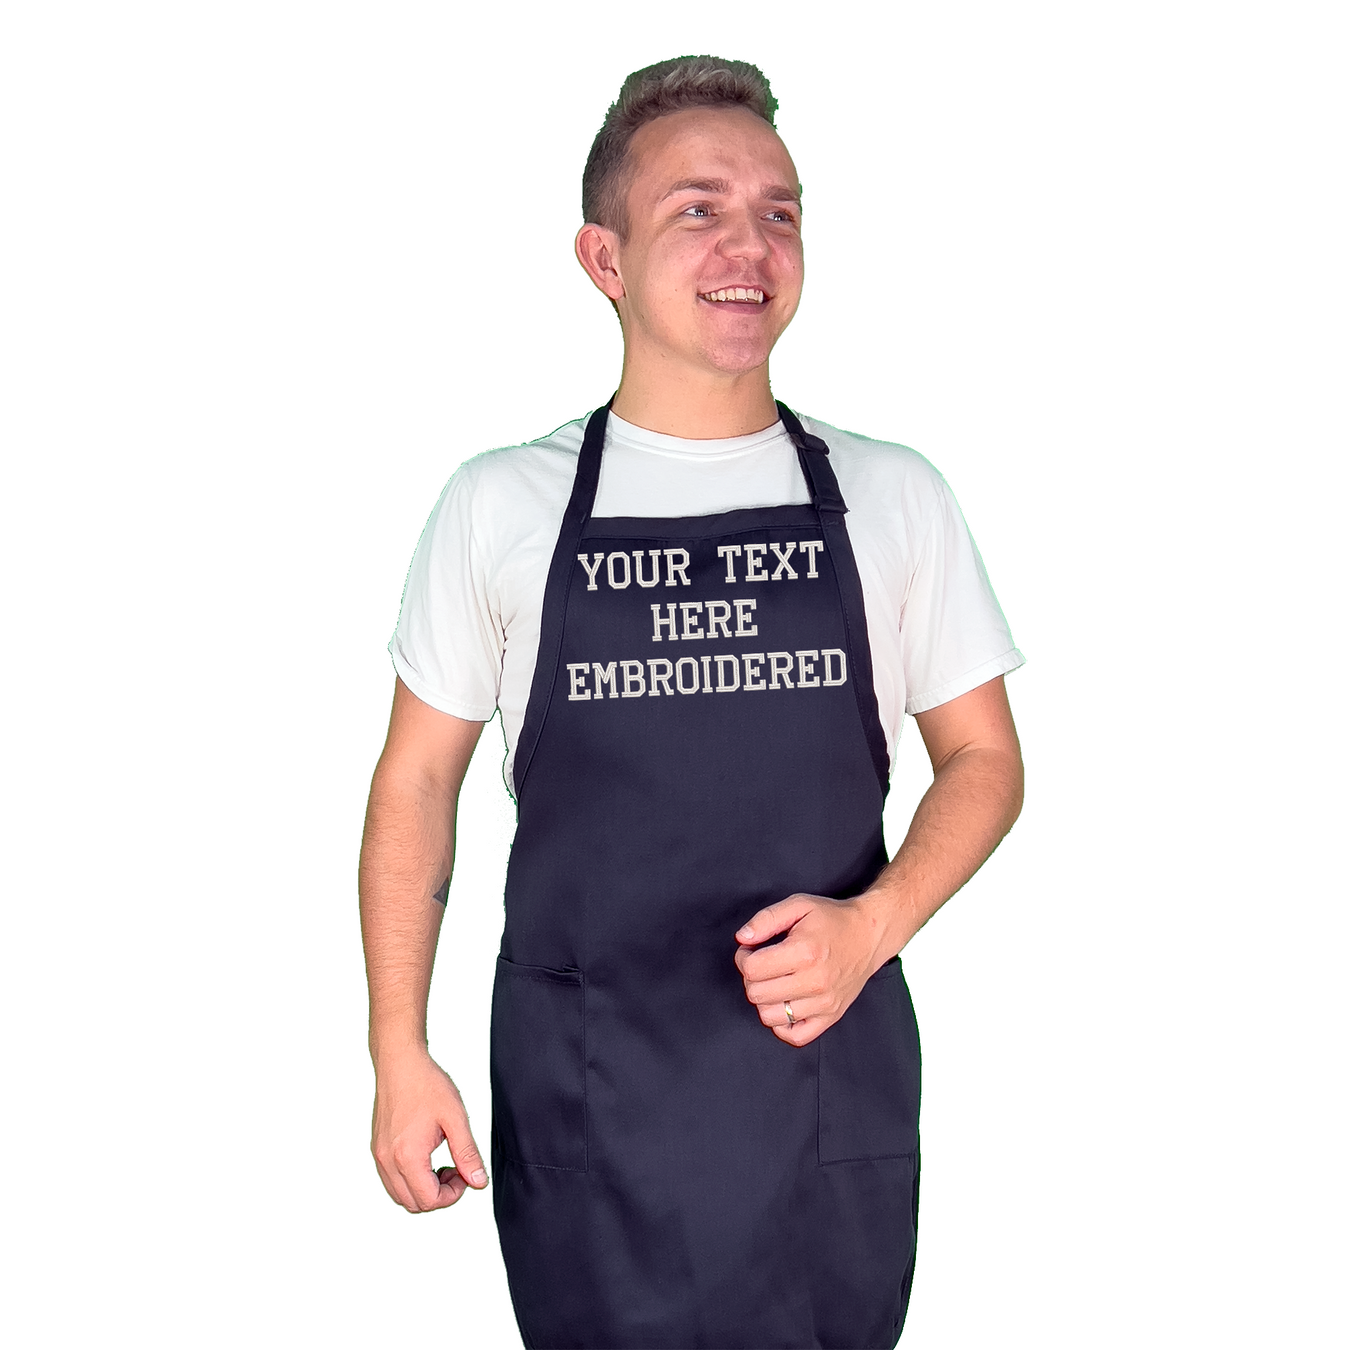 Personalized aprons with text